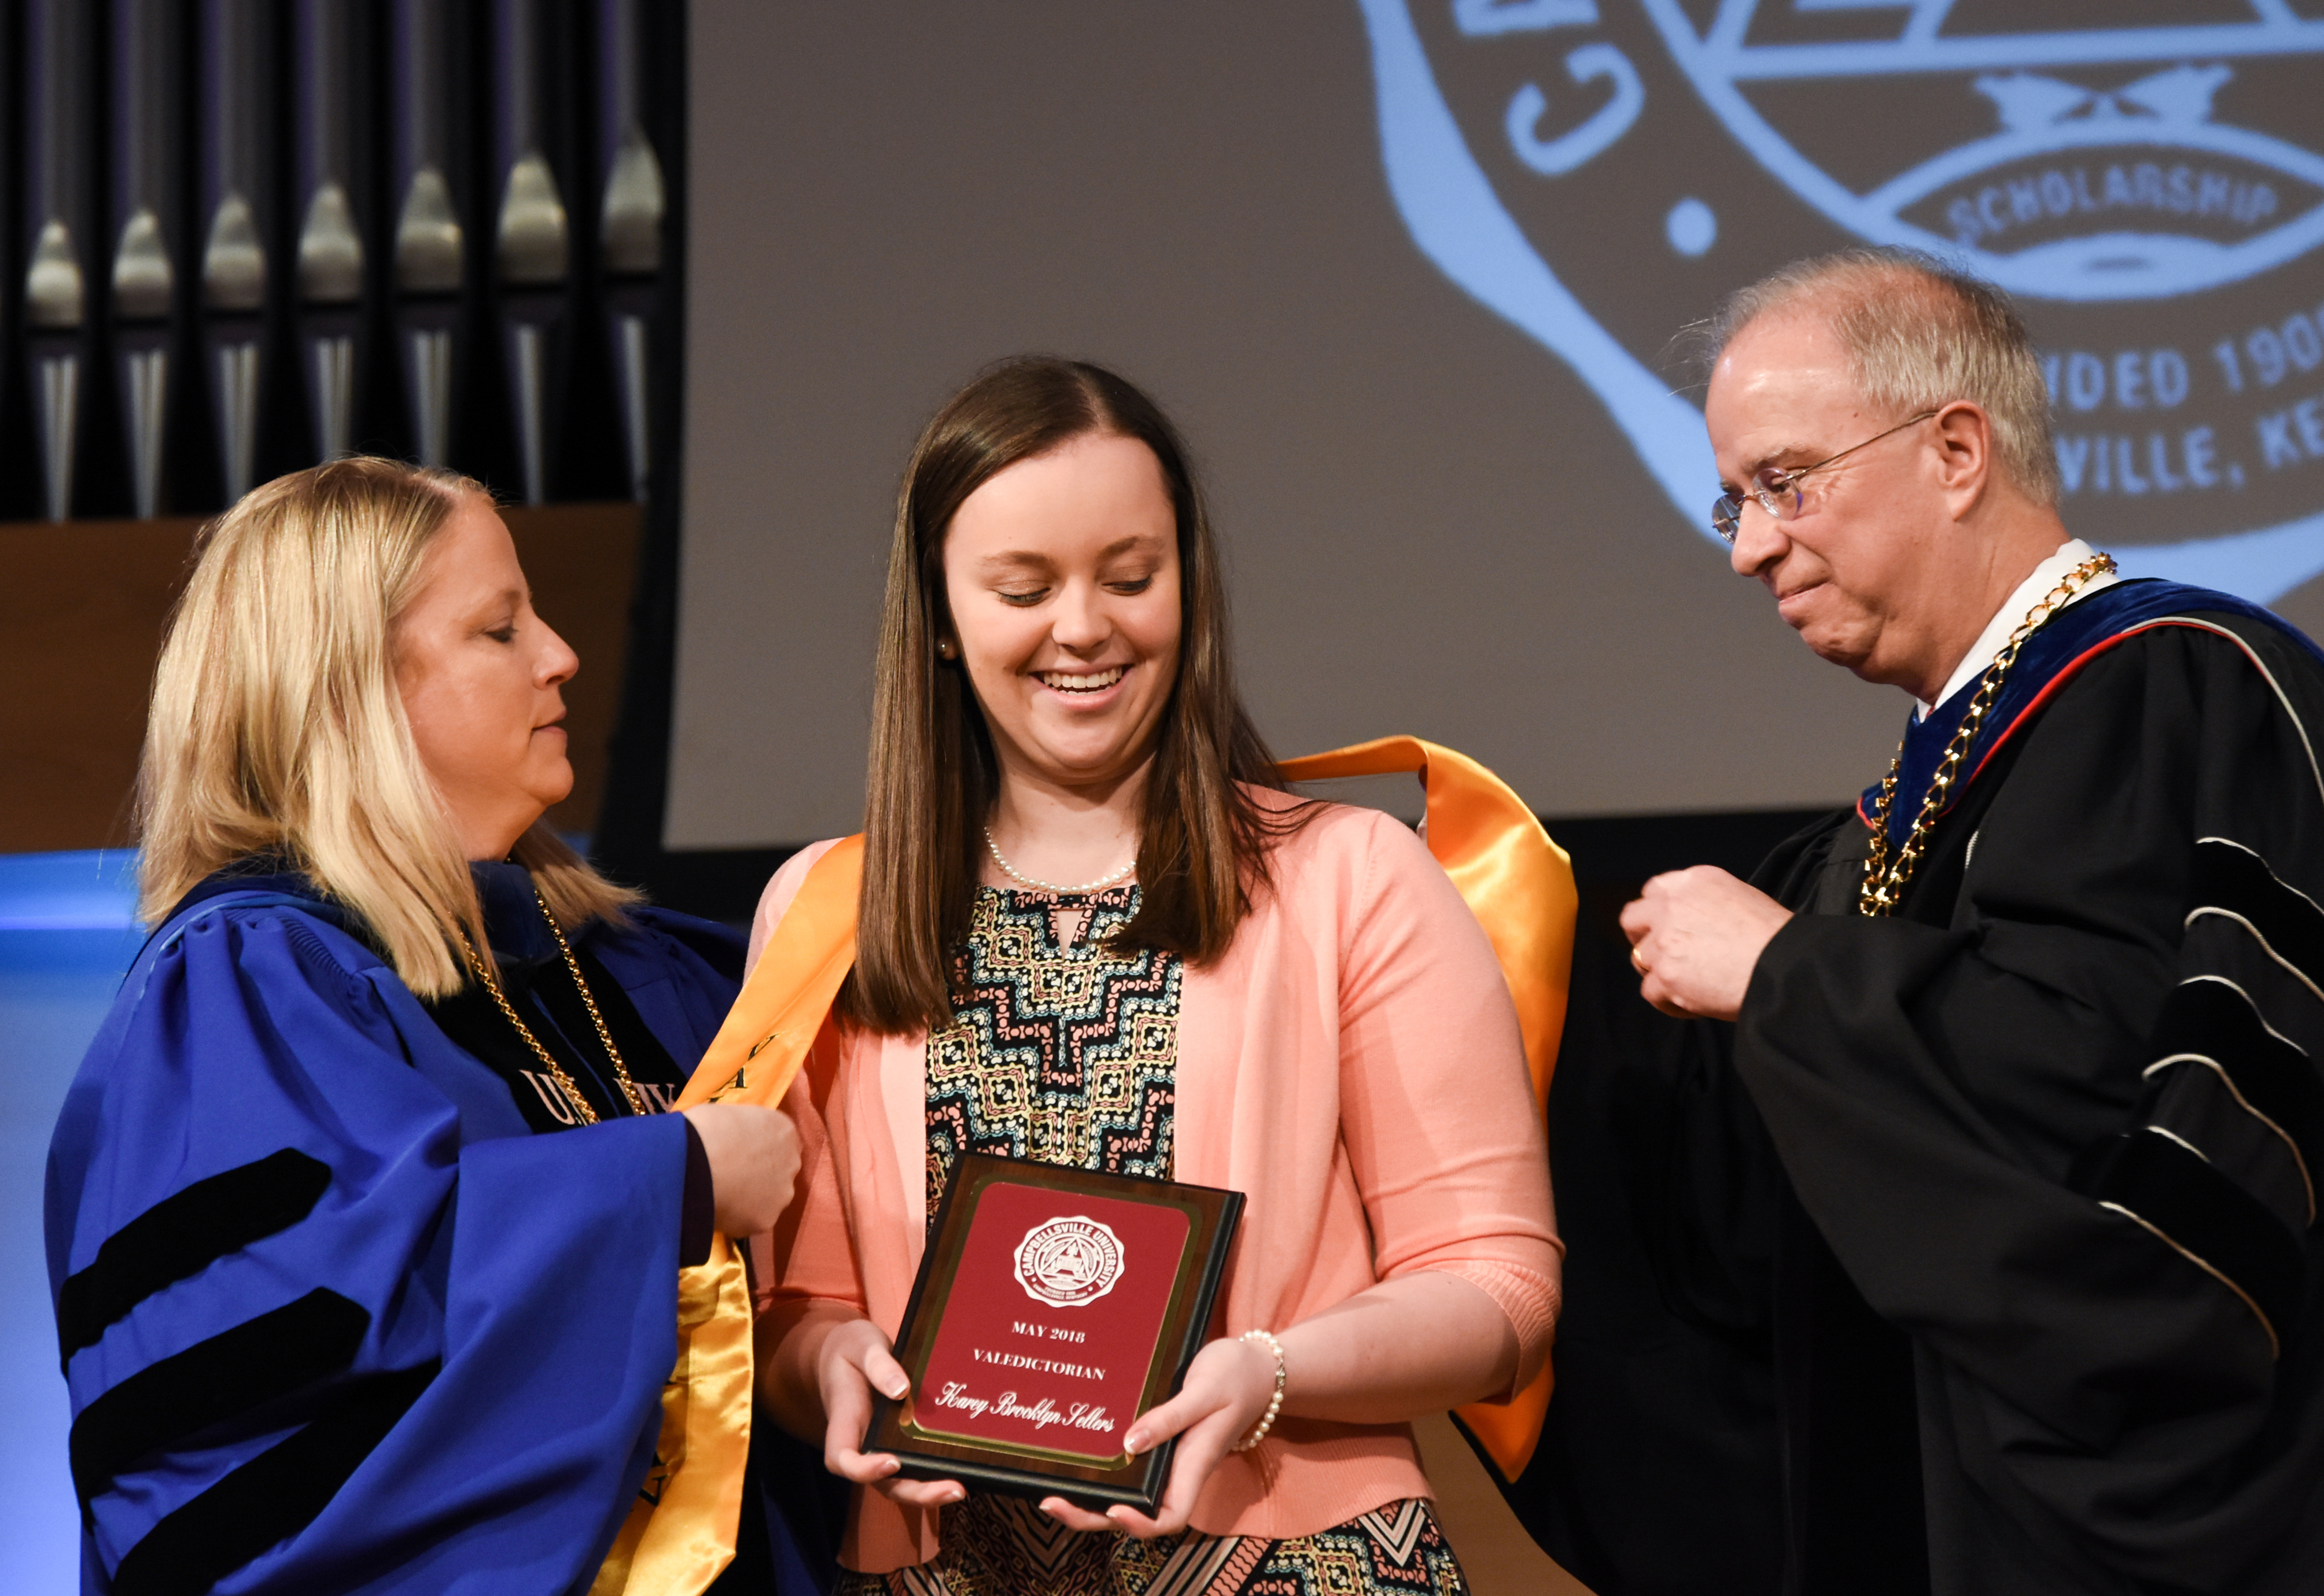     Karey Sellers, Liberty, Ky., is one of the co-valedictorians of the Campbellsville University graduating class who was honored at Honors and Awards Day. (Campbellsville University Photo by Joshua Williams) 